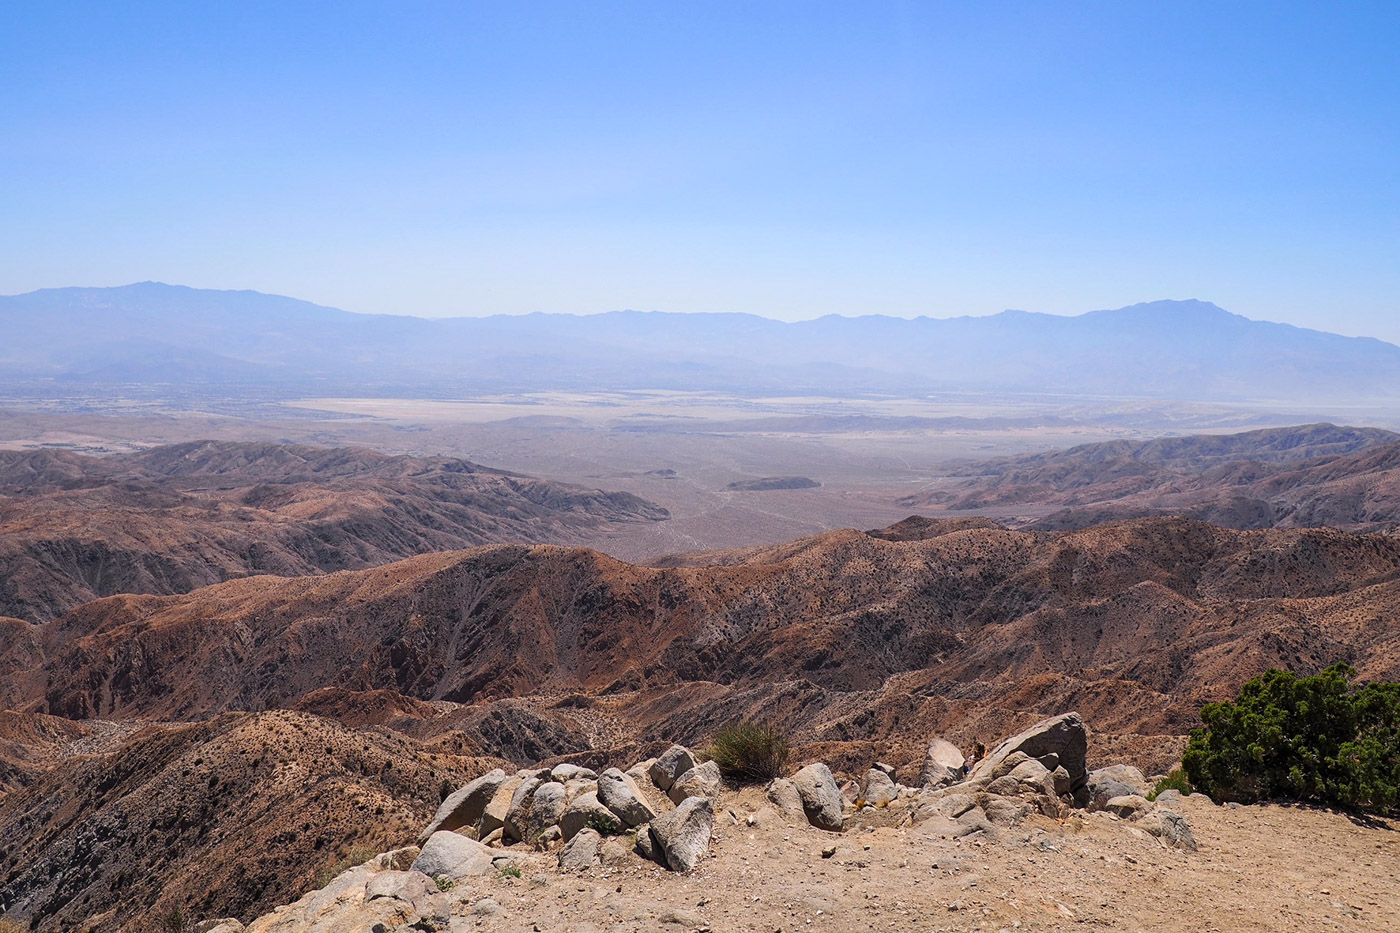 Saint Andreas Fault in the Coachella Valley